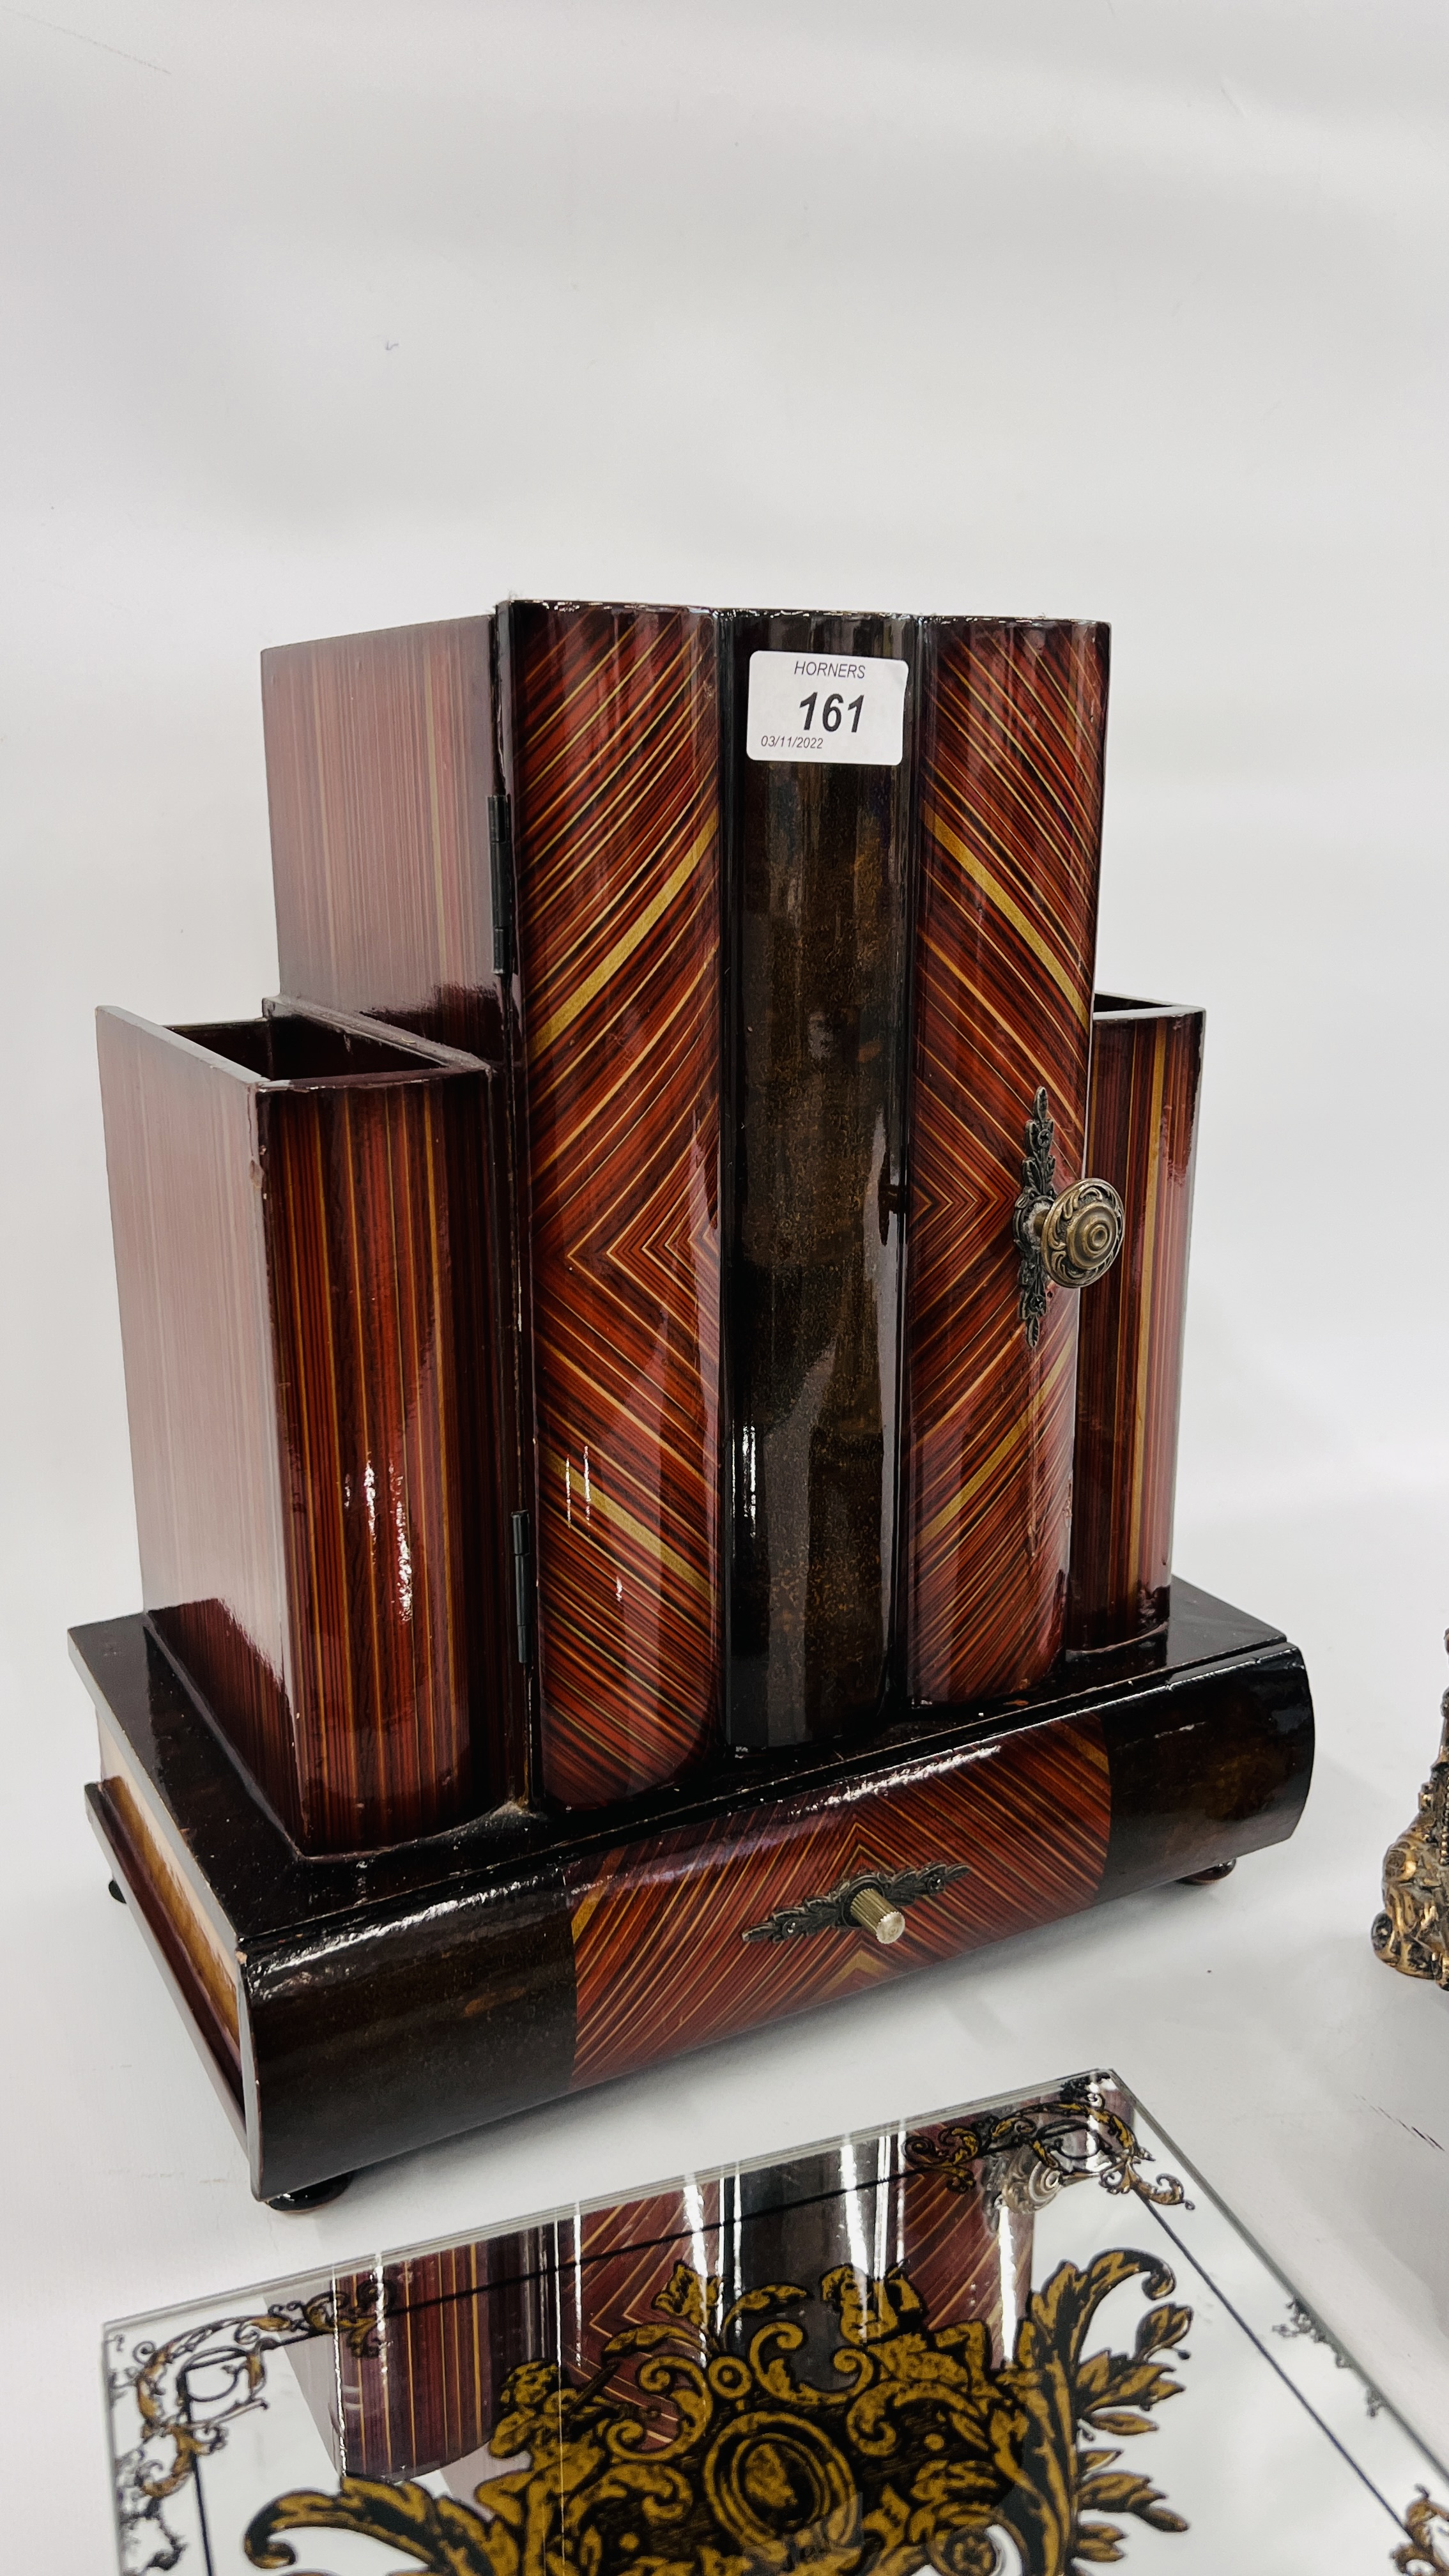 AN ART DECO STYLE LACQUERED DESK TIDY IN THE FORM OF BOOKS HEIGHT 33CM. - Image 2 of 11